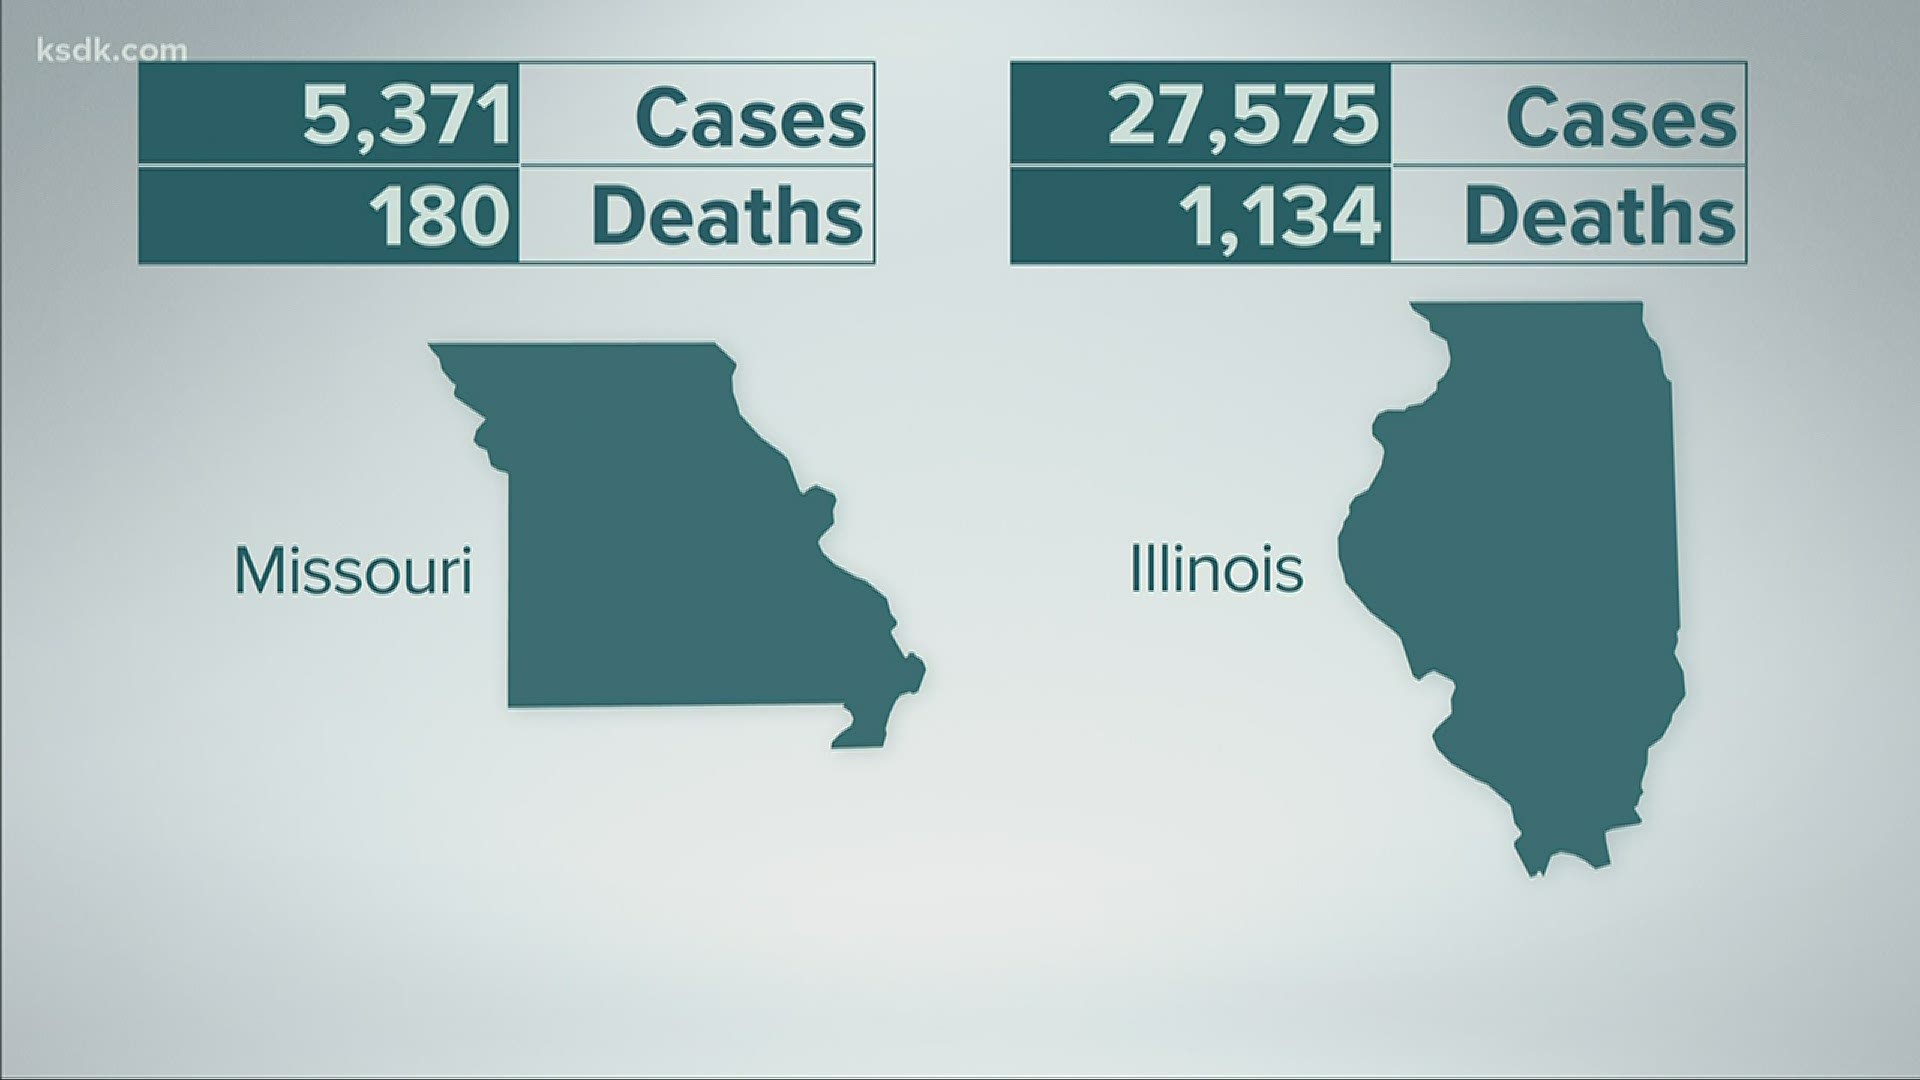 The latest updates and numbers on the COVID-19 pandemic from Missouri and Illinois from our 6 p.m. newscast on Friday, April 17.